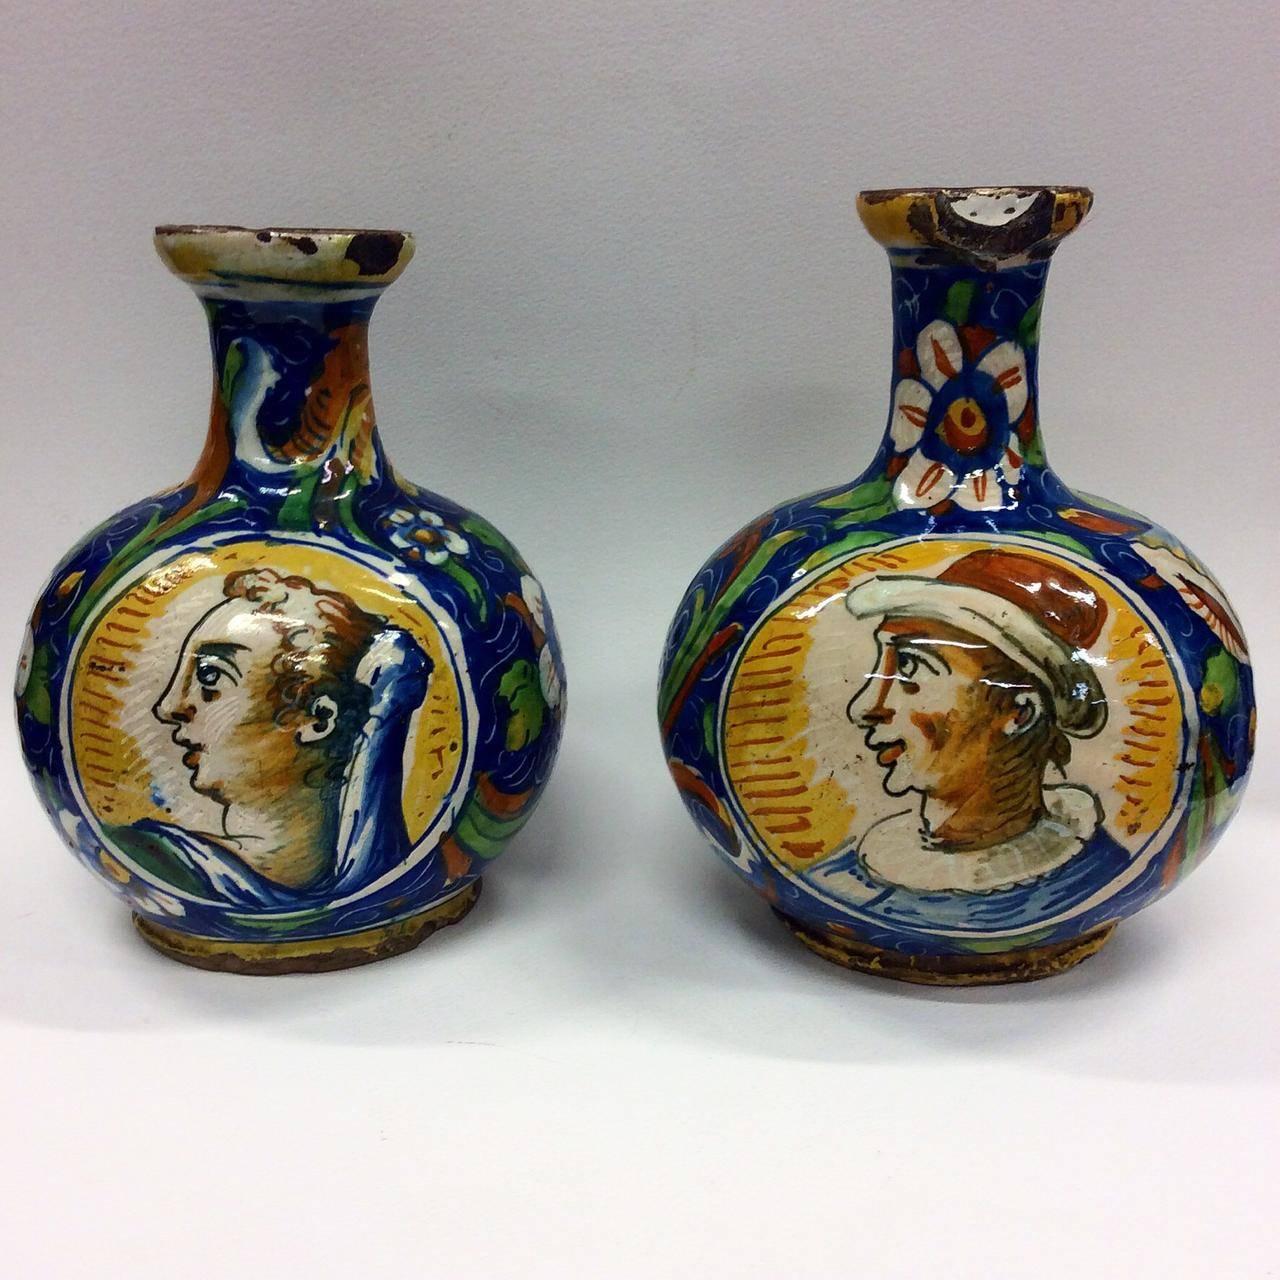 Each of the vases in a matching shape of a globular body with a neck featuring a gently flaring rim. They are painted with a blue ground featuring circular medallions on either side of the rounded body. One side of each vase features a painting of a